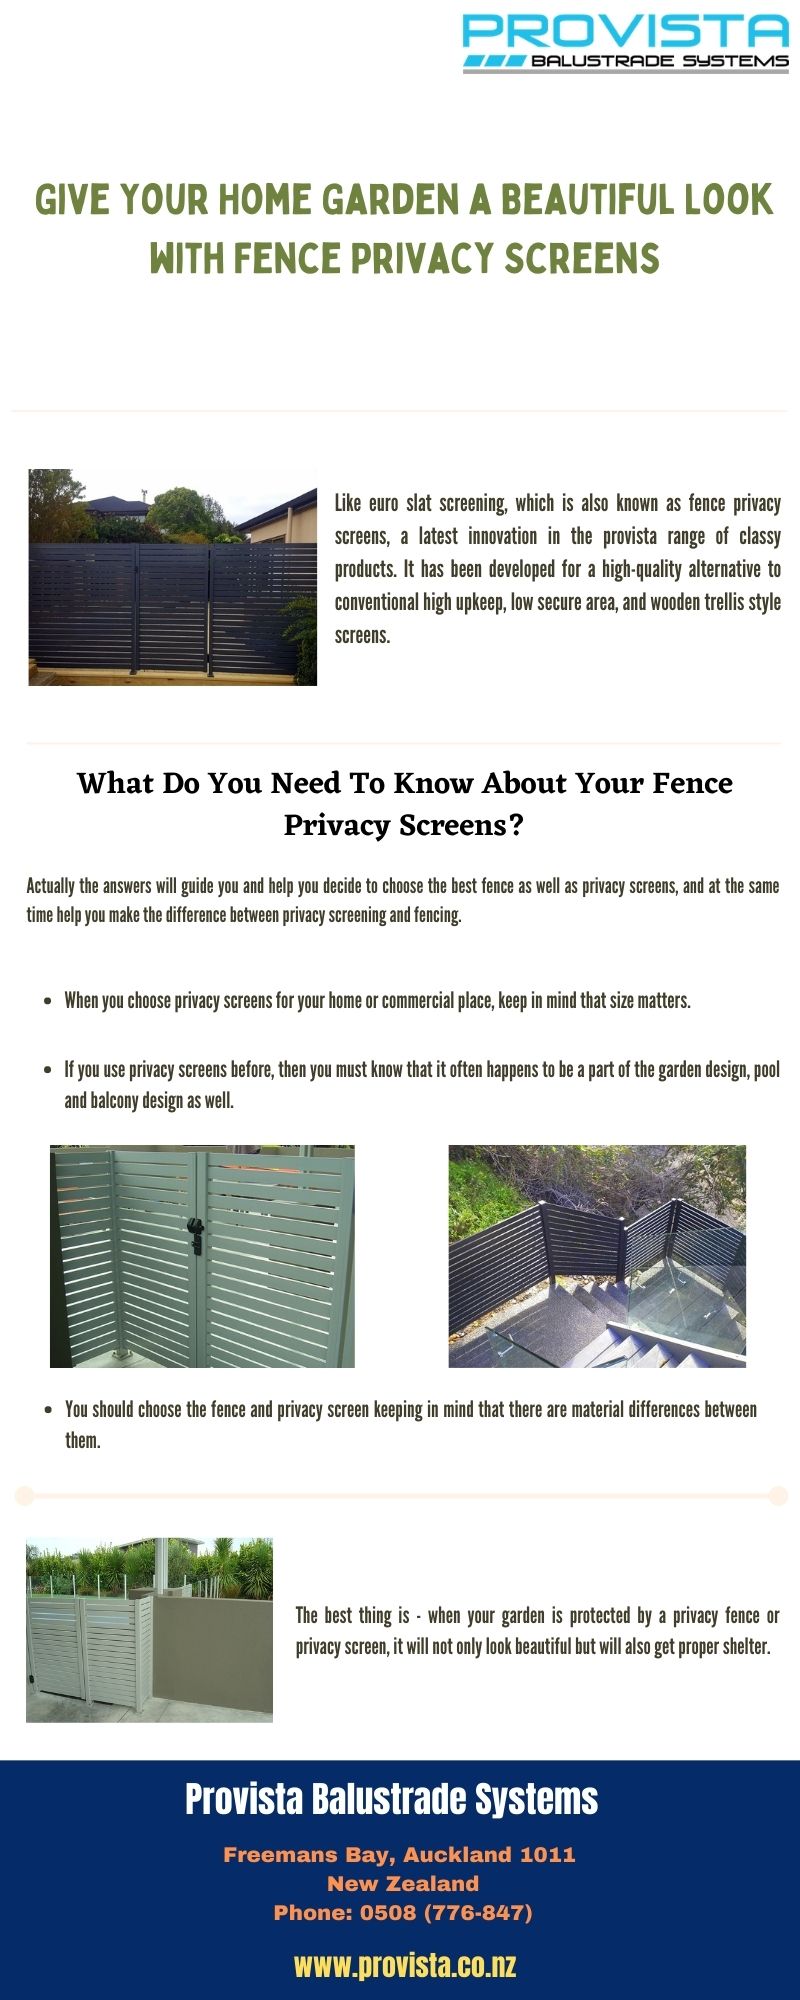 Give Your Home Garden a Beautiful Look with Fence Privacy Screens It is a place where you get only quality fence and privacy screens at best prices, and bespoke after sale service. For more details, visit: https://bit.ly/3bz0EQD by Provista